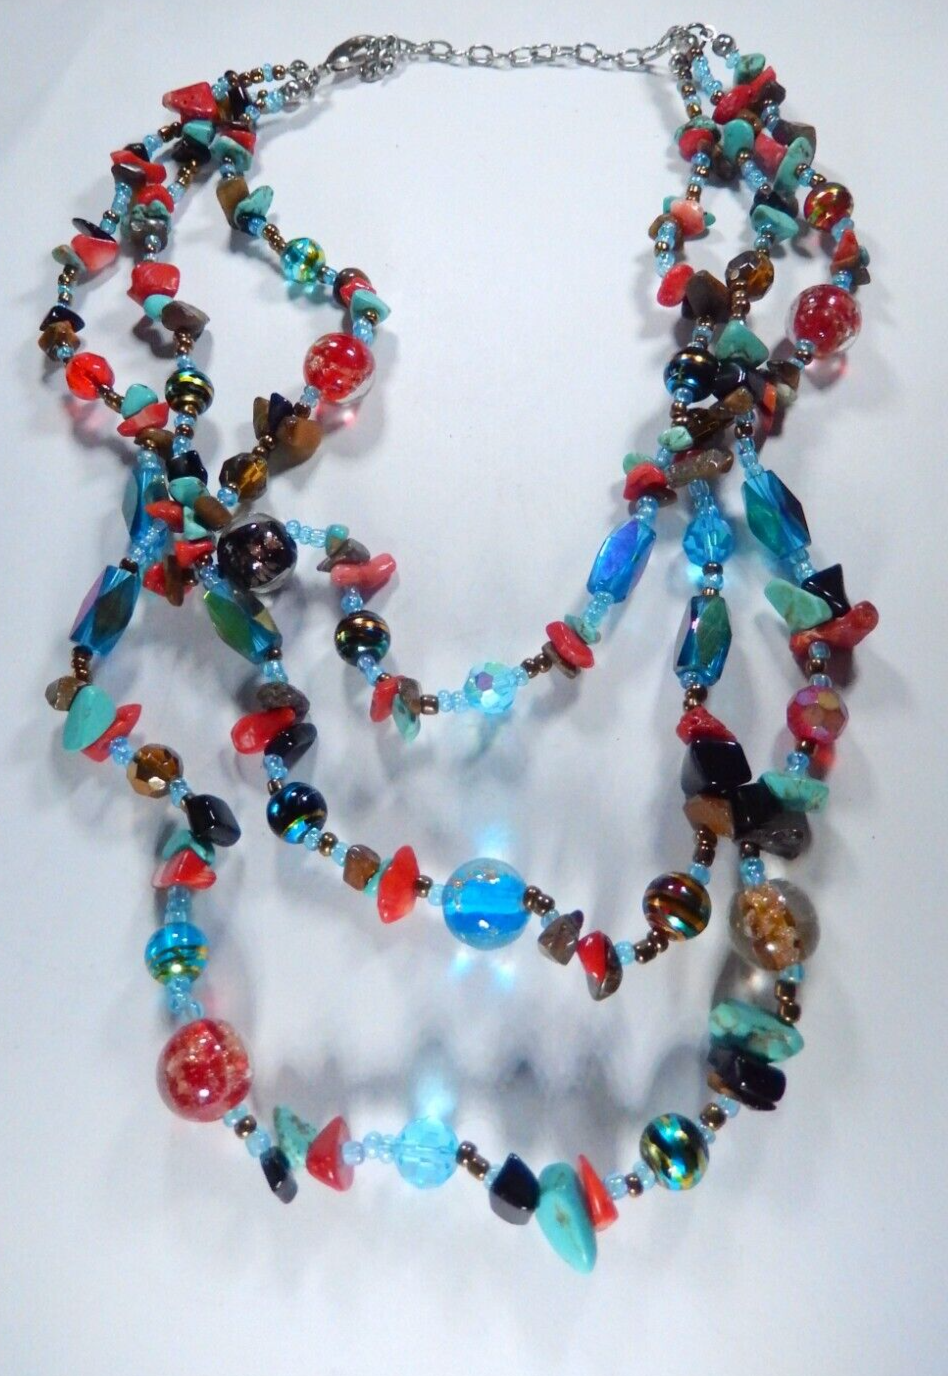 Three strand turquoise stone and glass bead silver tone link necklace 16" - 18"